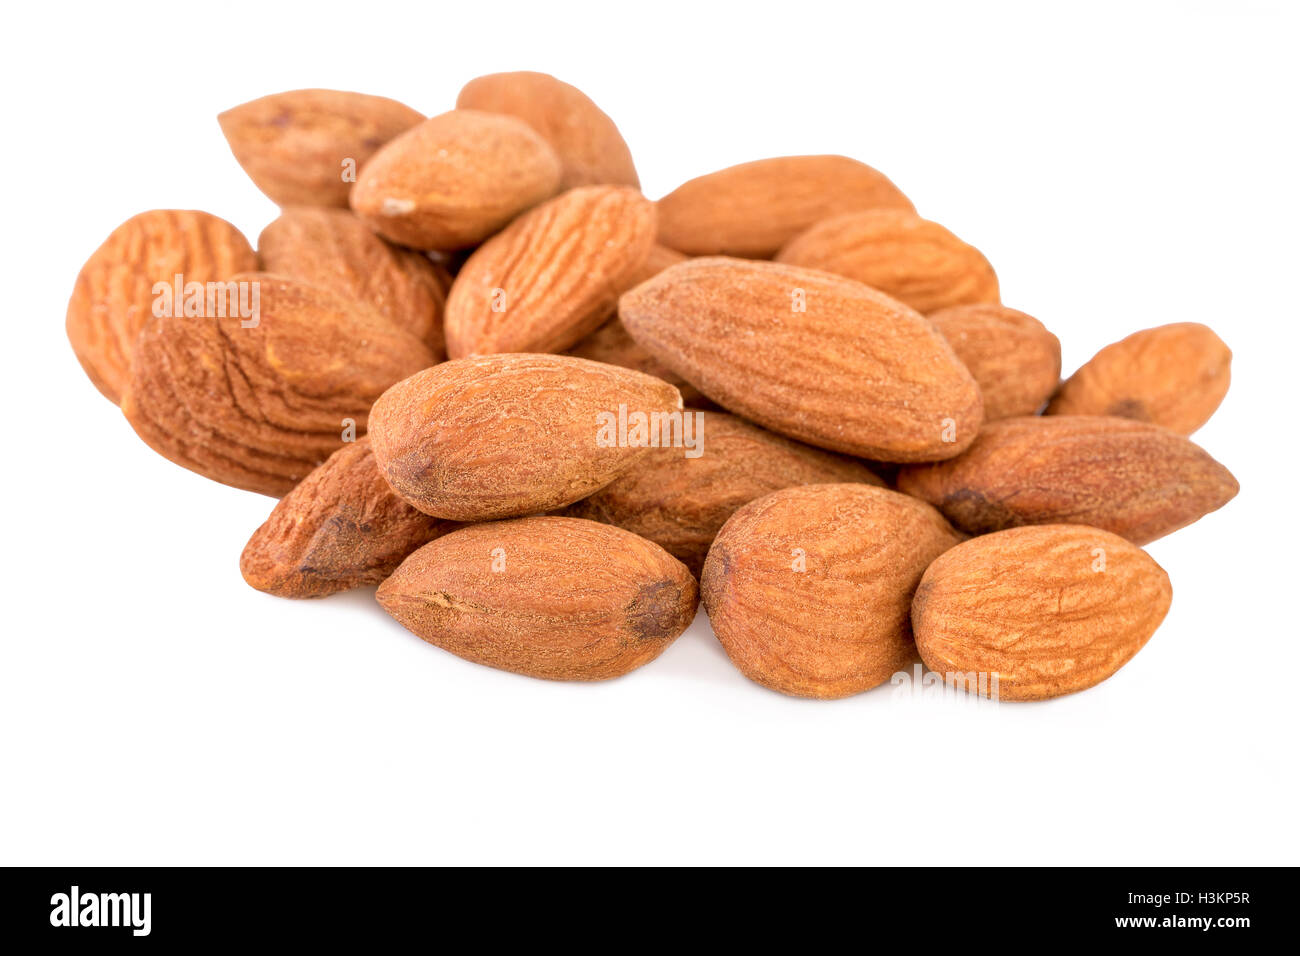 Heap of Almond Nuts on White Stock Photo